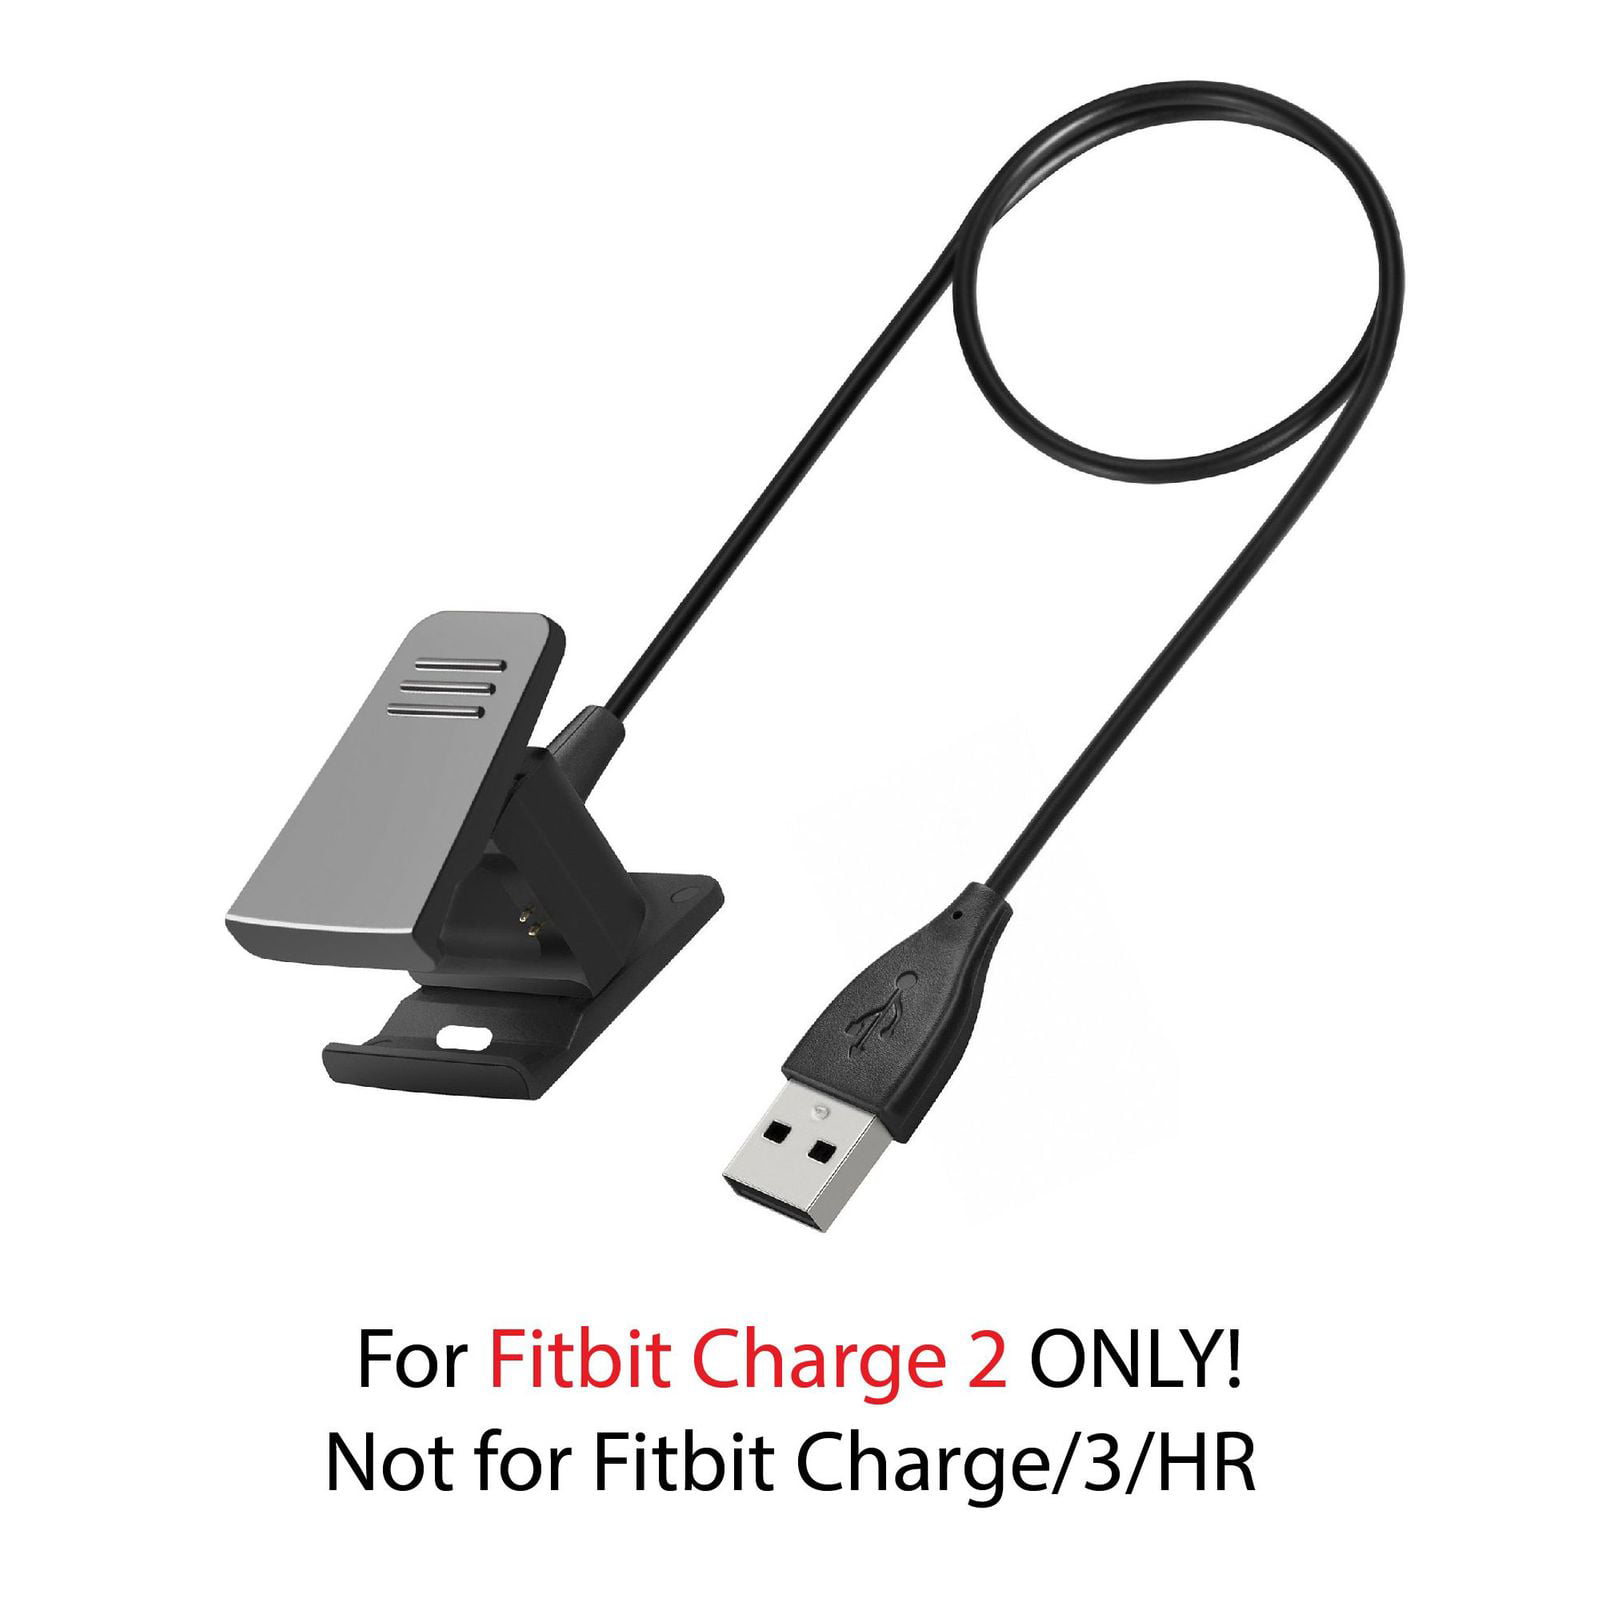 Fitbit Charge 2 USB Charging Cable Dock Adapter/ 3 Pack Anti-scratch Protectors 